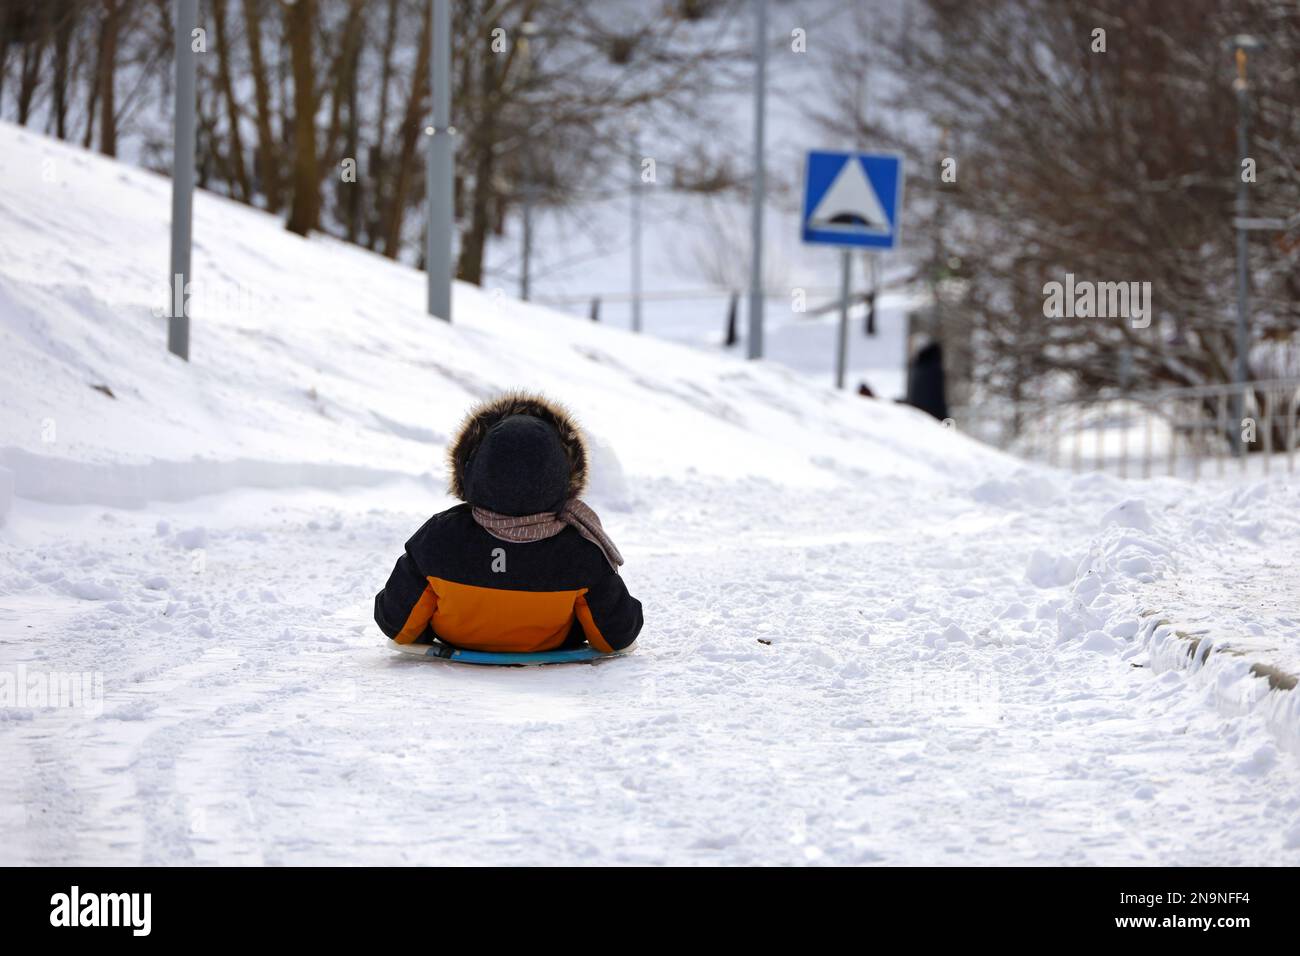 Child riding on sledge by the snowy road, little boy during tubing in winter park Stock Photo